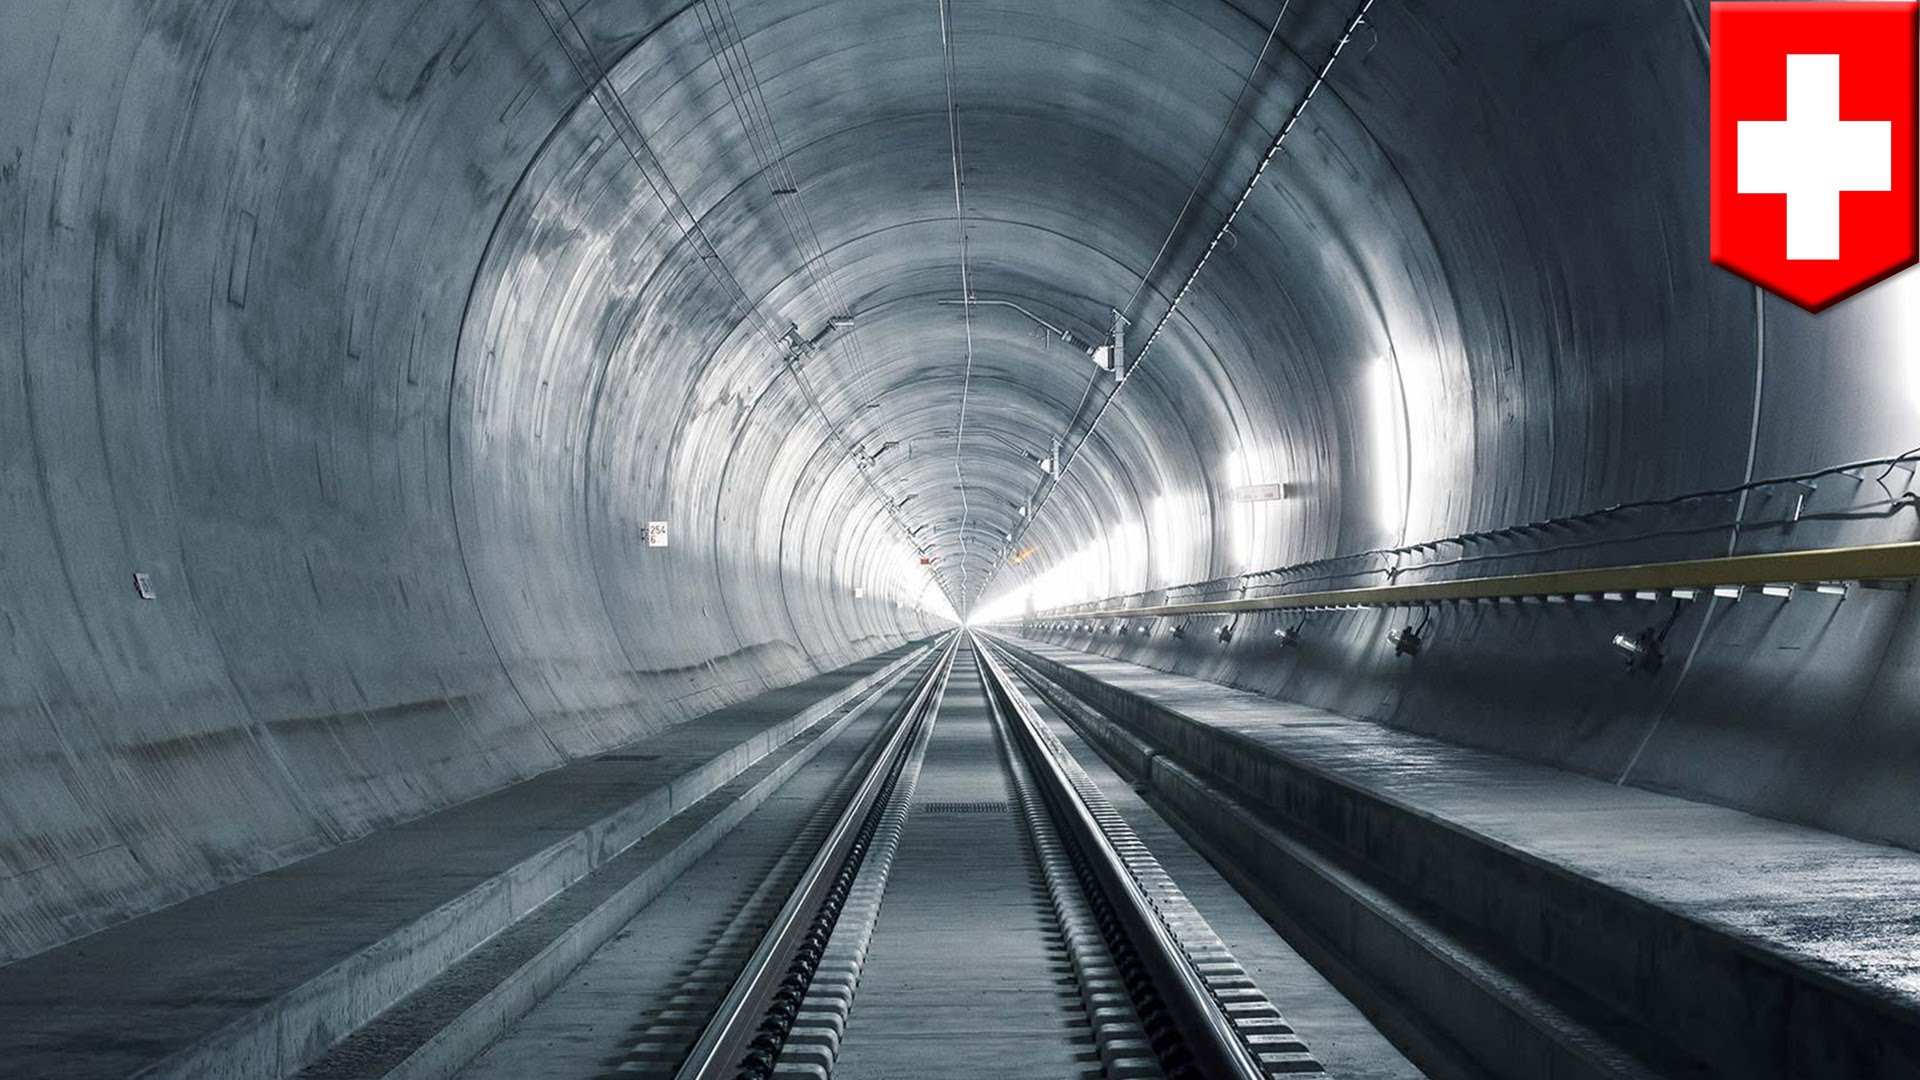 World’s longest and most expensive railway tunnel, Gotthard Base Tunnel